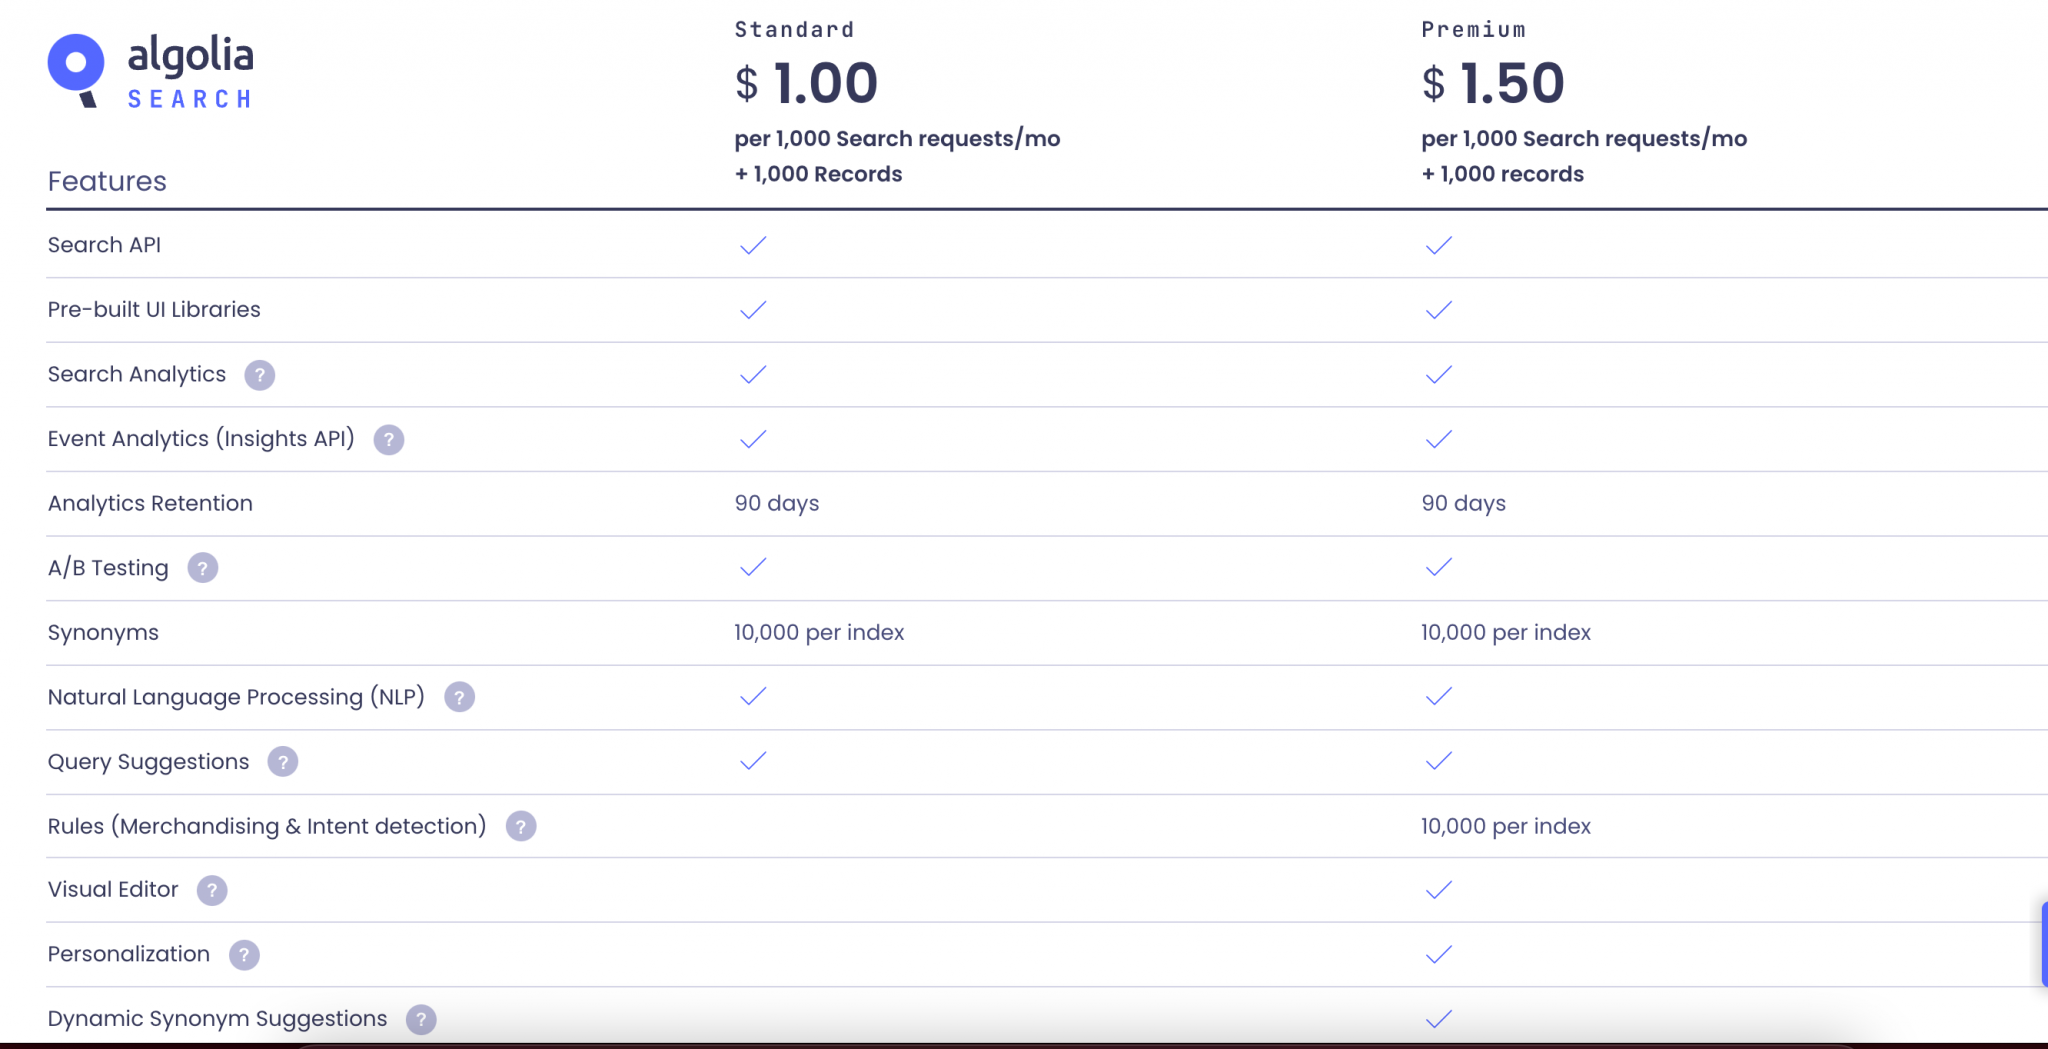 Example of Algolia’s packages. Time of the screenshot: February 2, 2022.